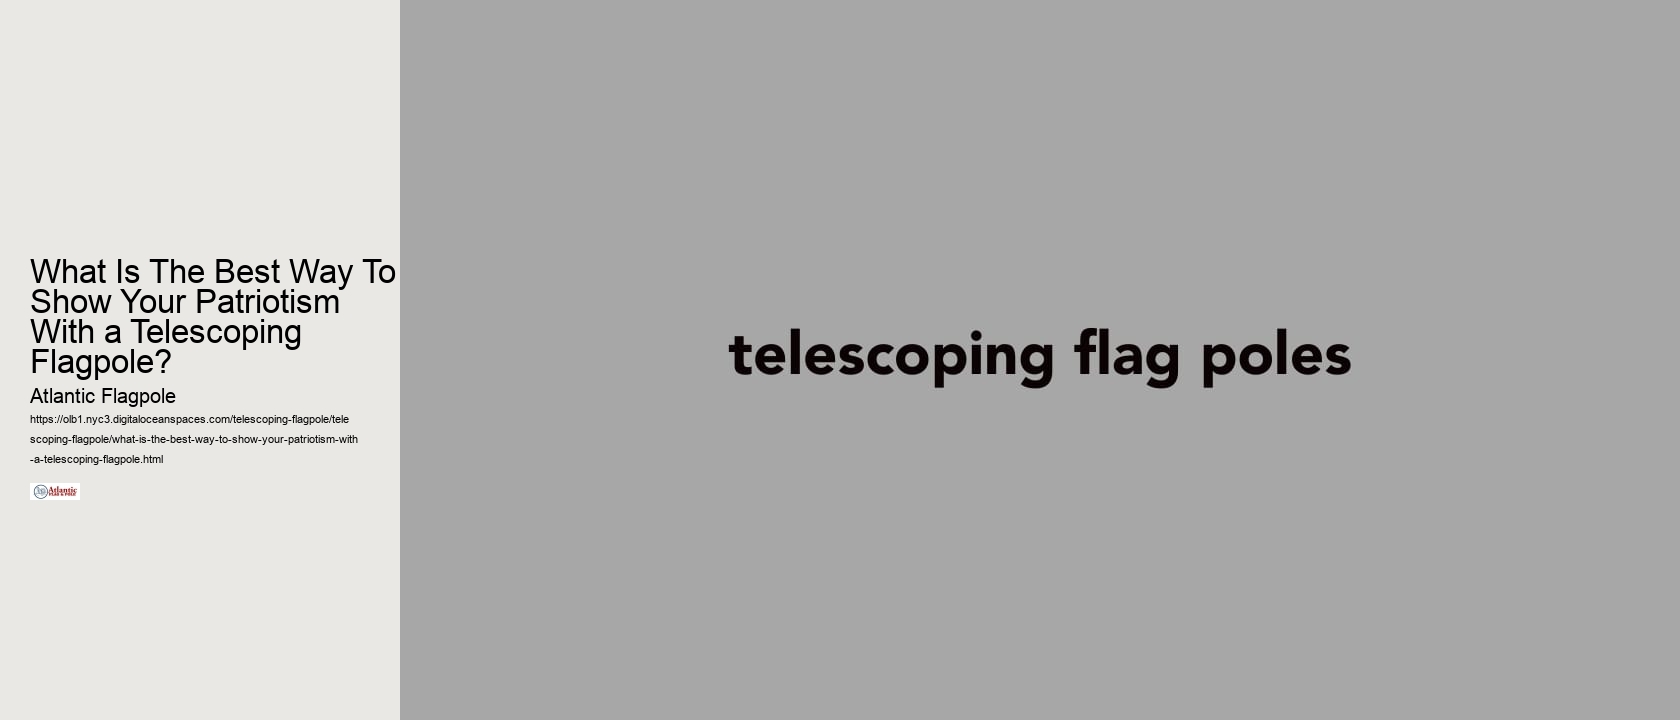 What Is The Best Way To Show Your Patriotism With a Telescoping Flagpole?